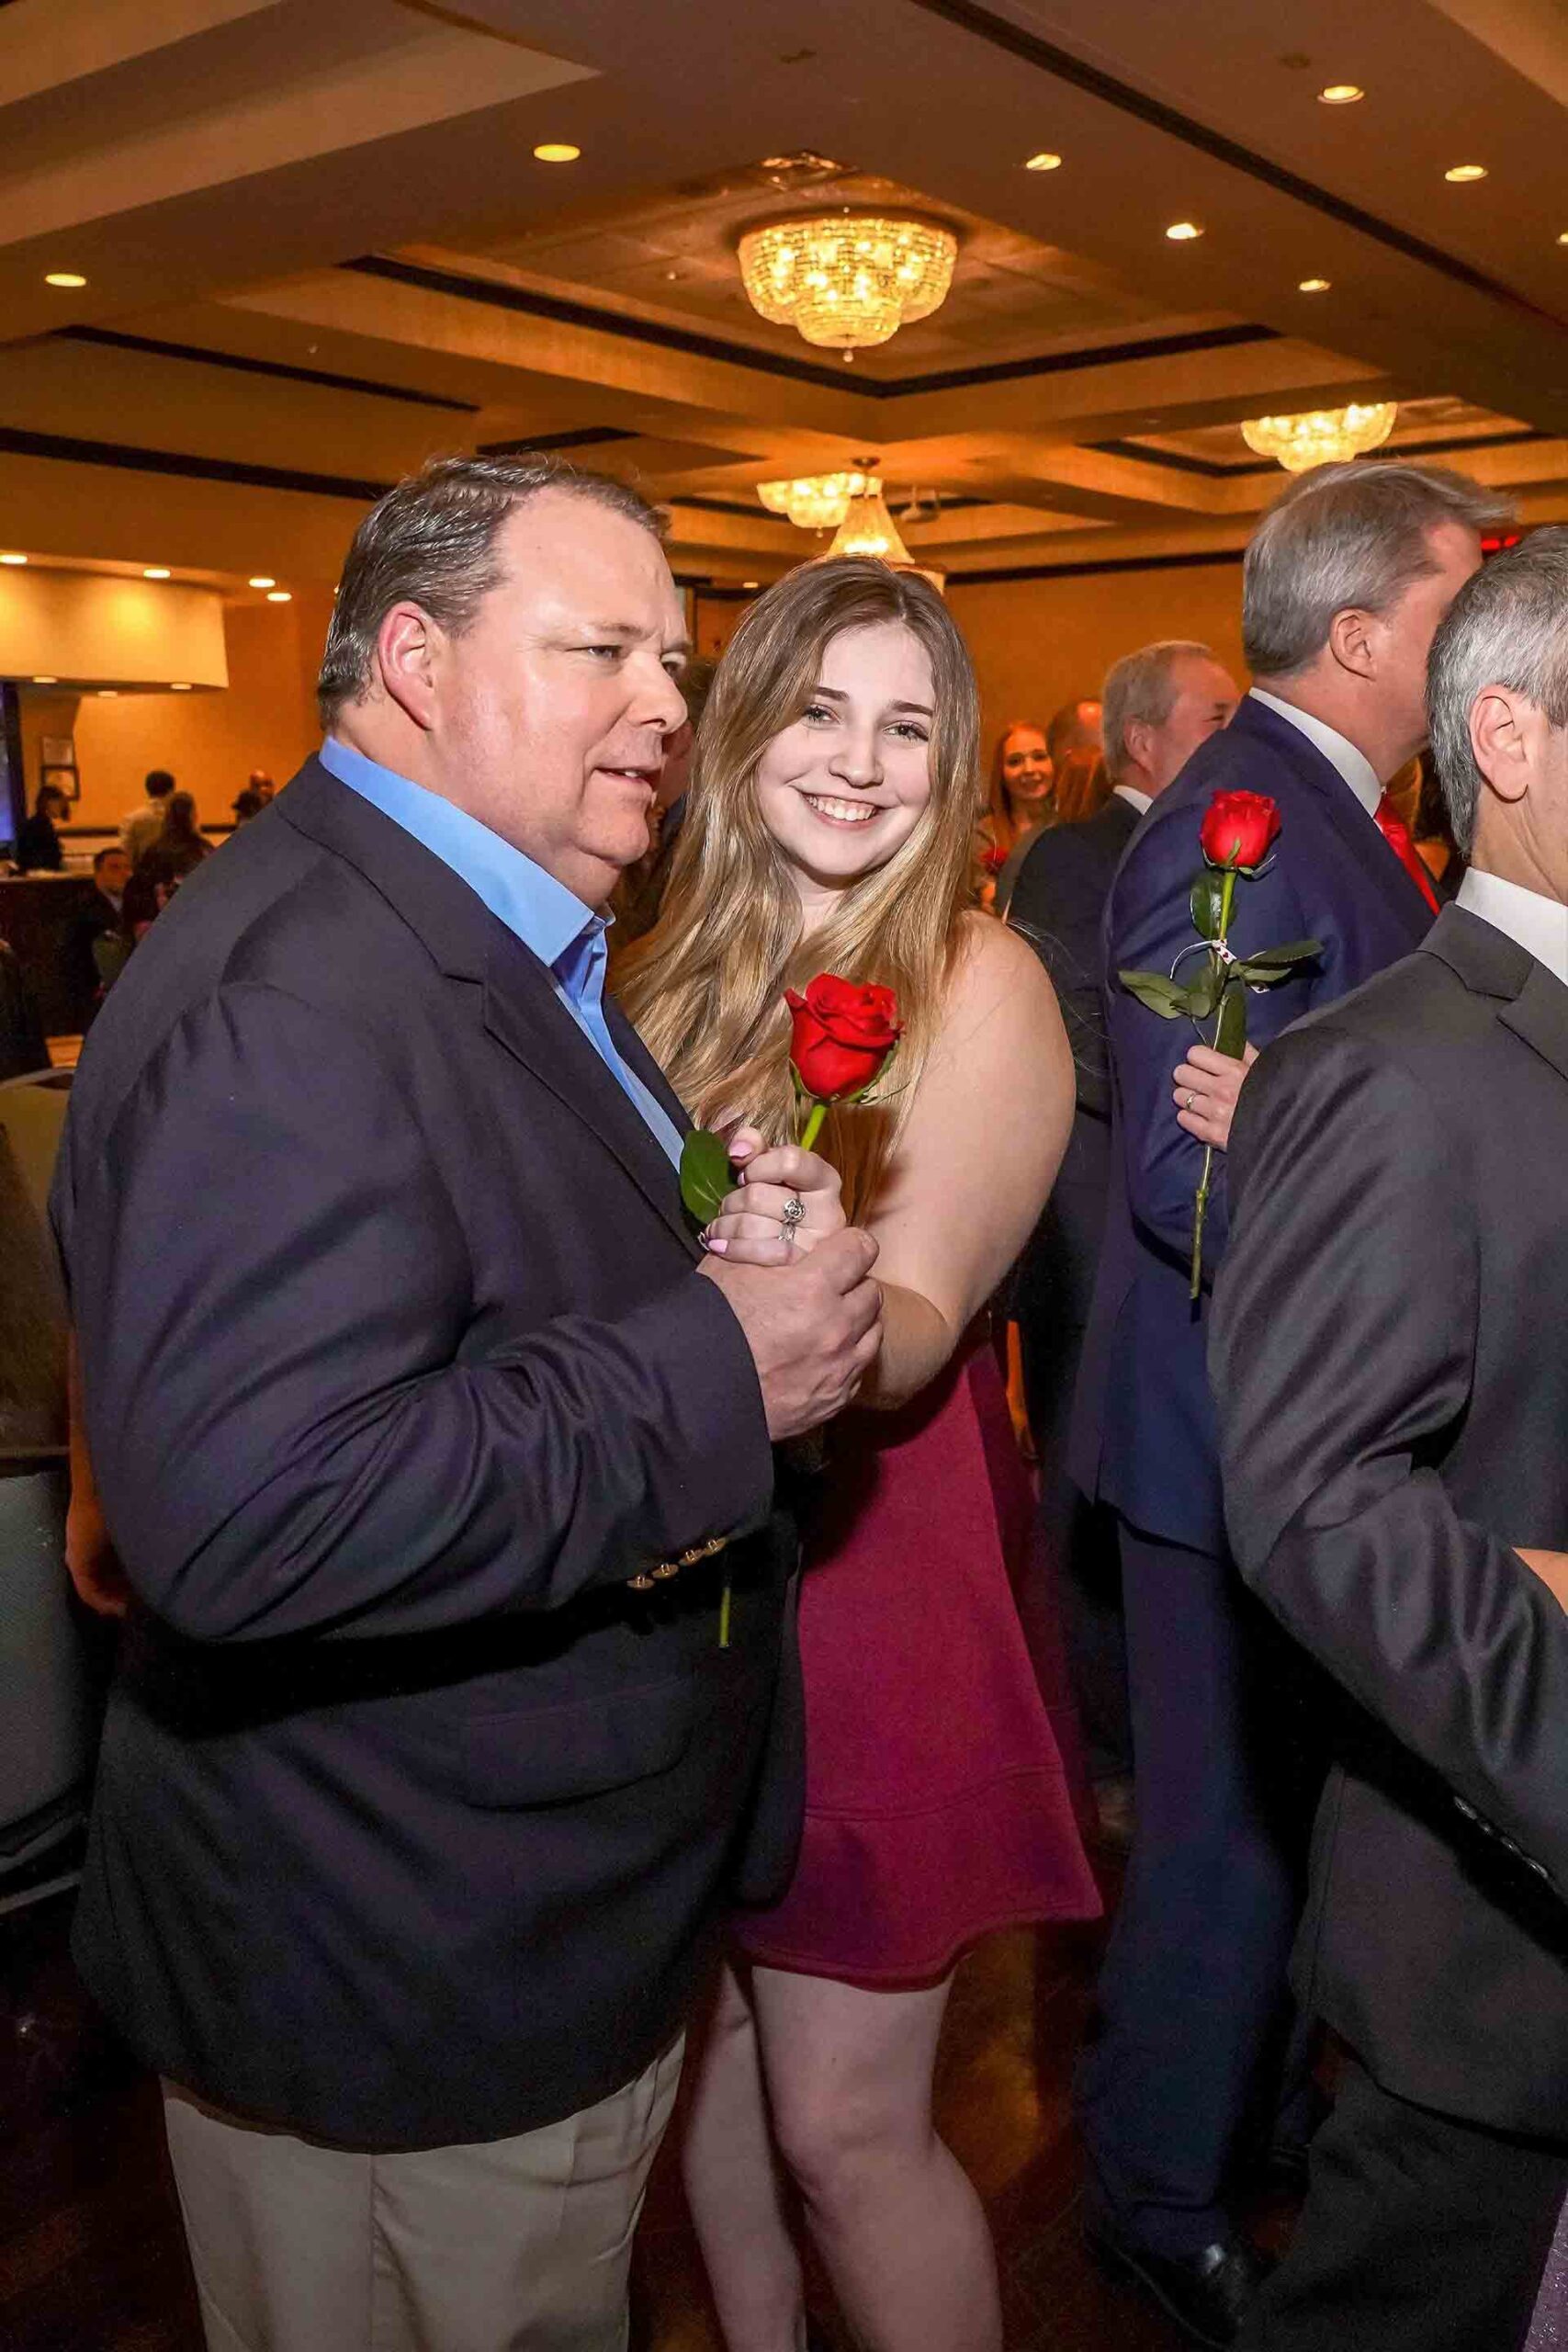 father-daughter-dance-2019-girl-smiling-with-rose